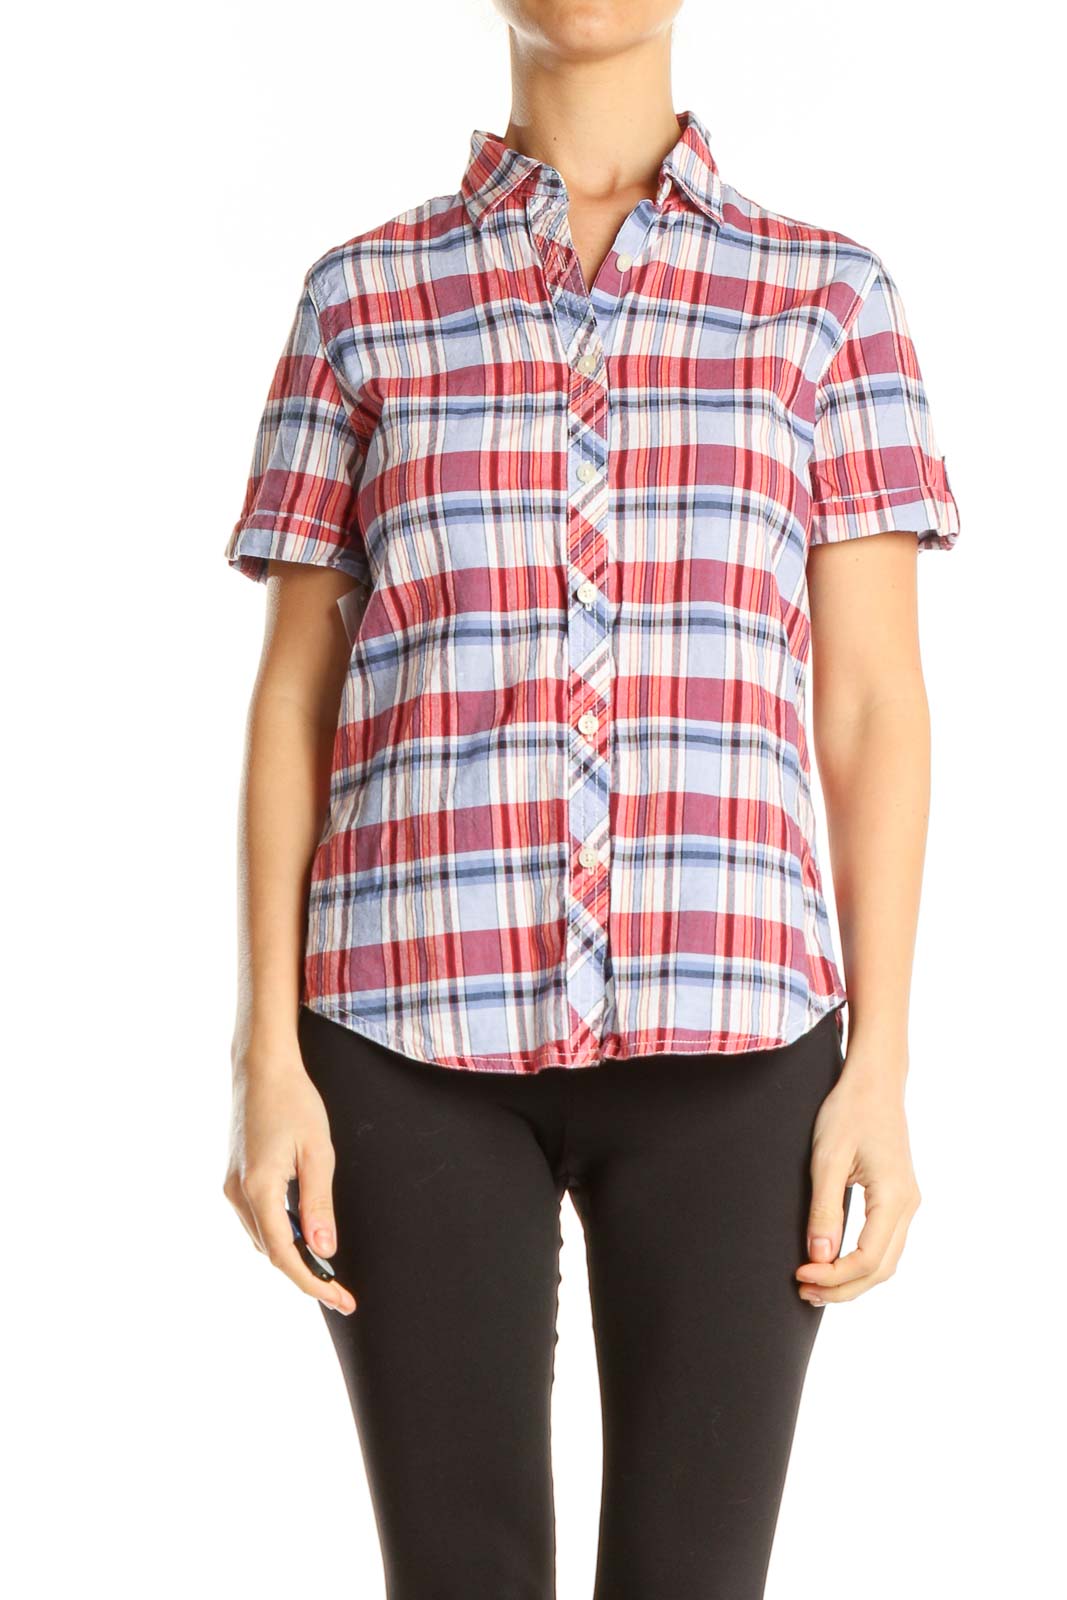 Multicolor Checkered Casual Top Front